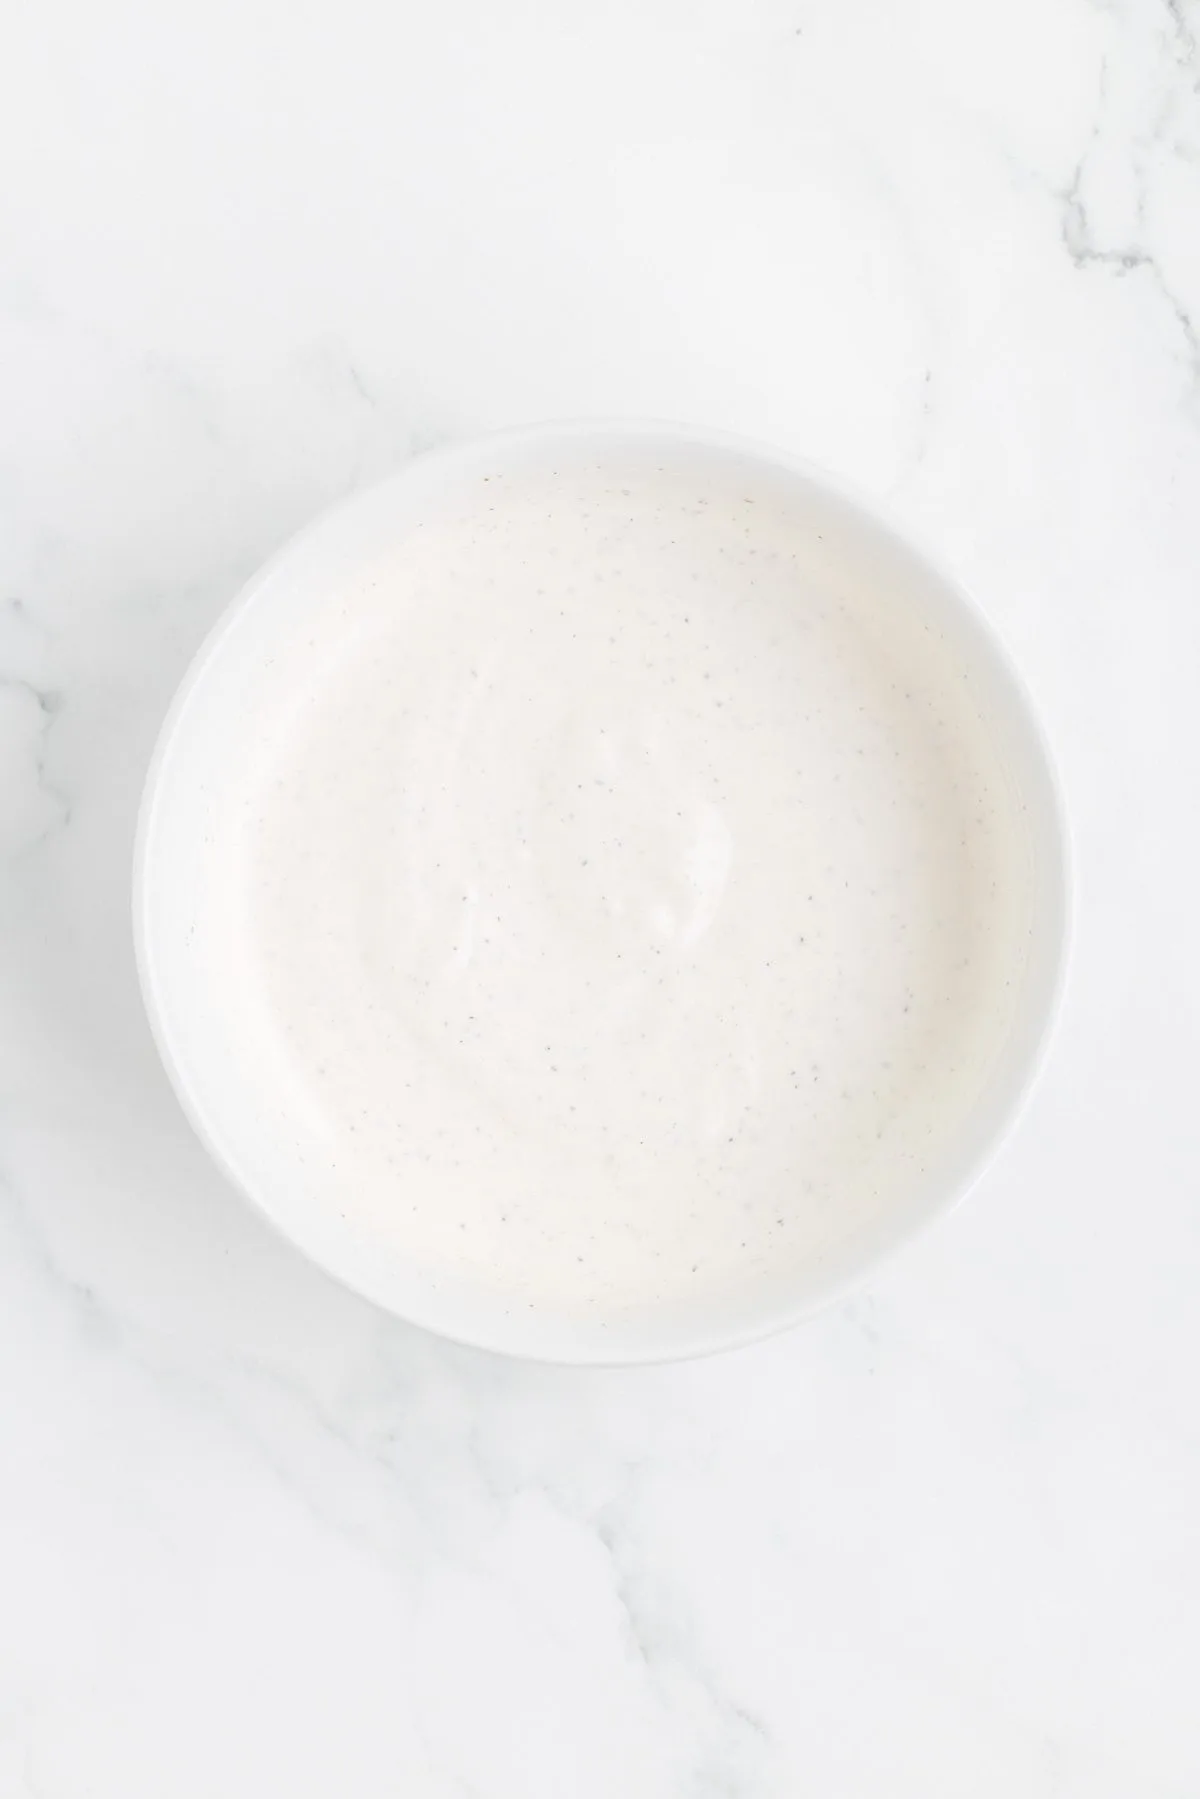 mayo and sour cream dressing in a mixing bowl